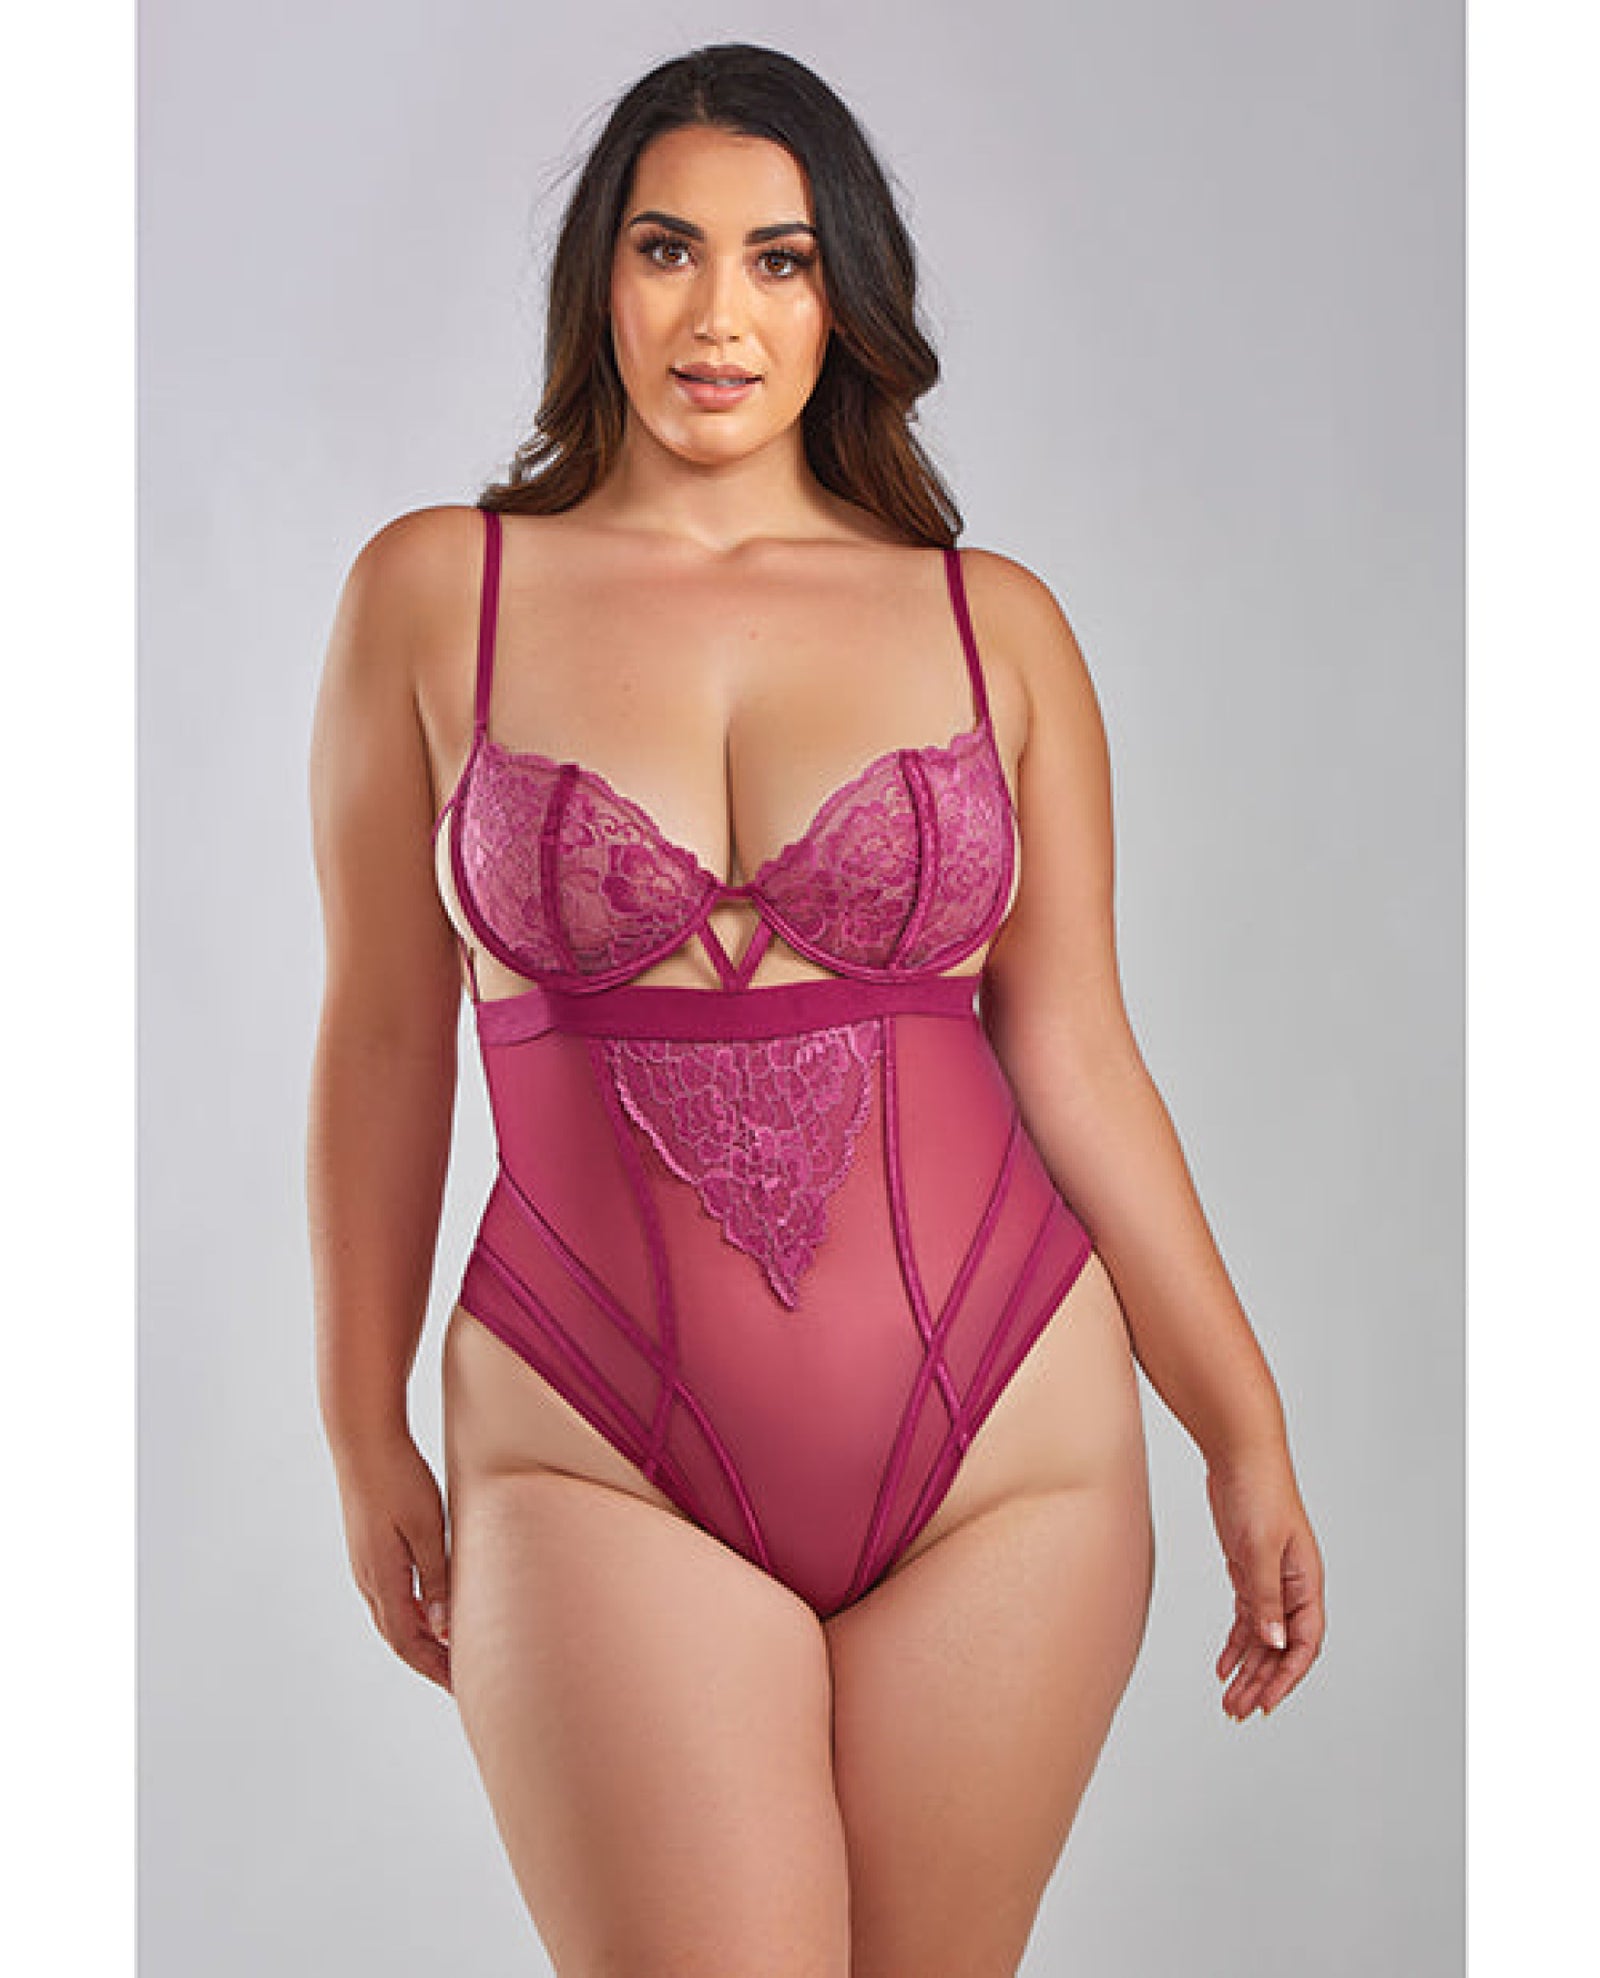 Quinn Cross Dyed Galloon Lace & Mesh Teddy Wine Icollection